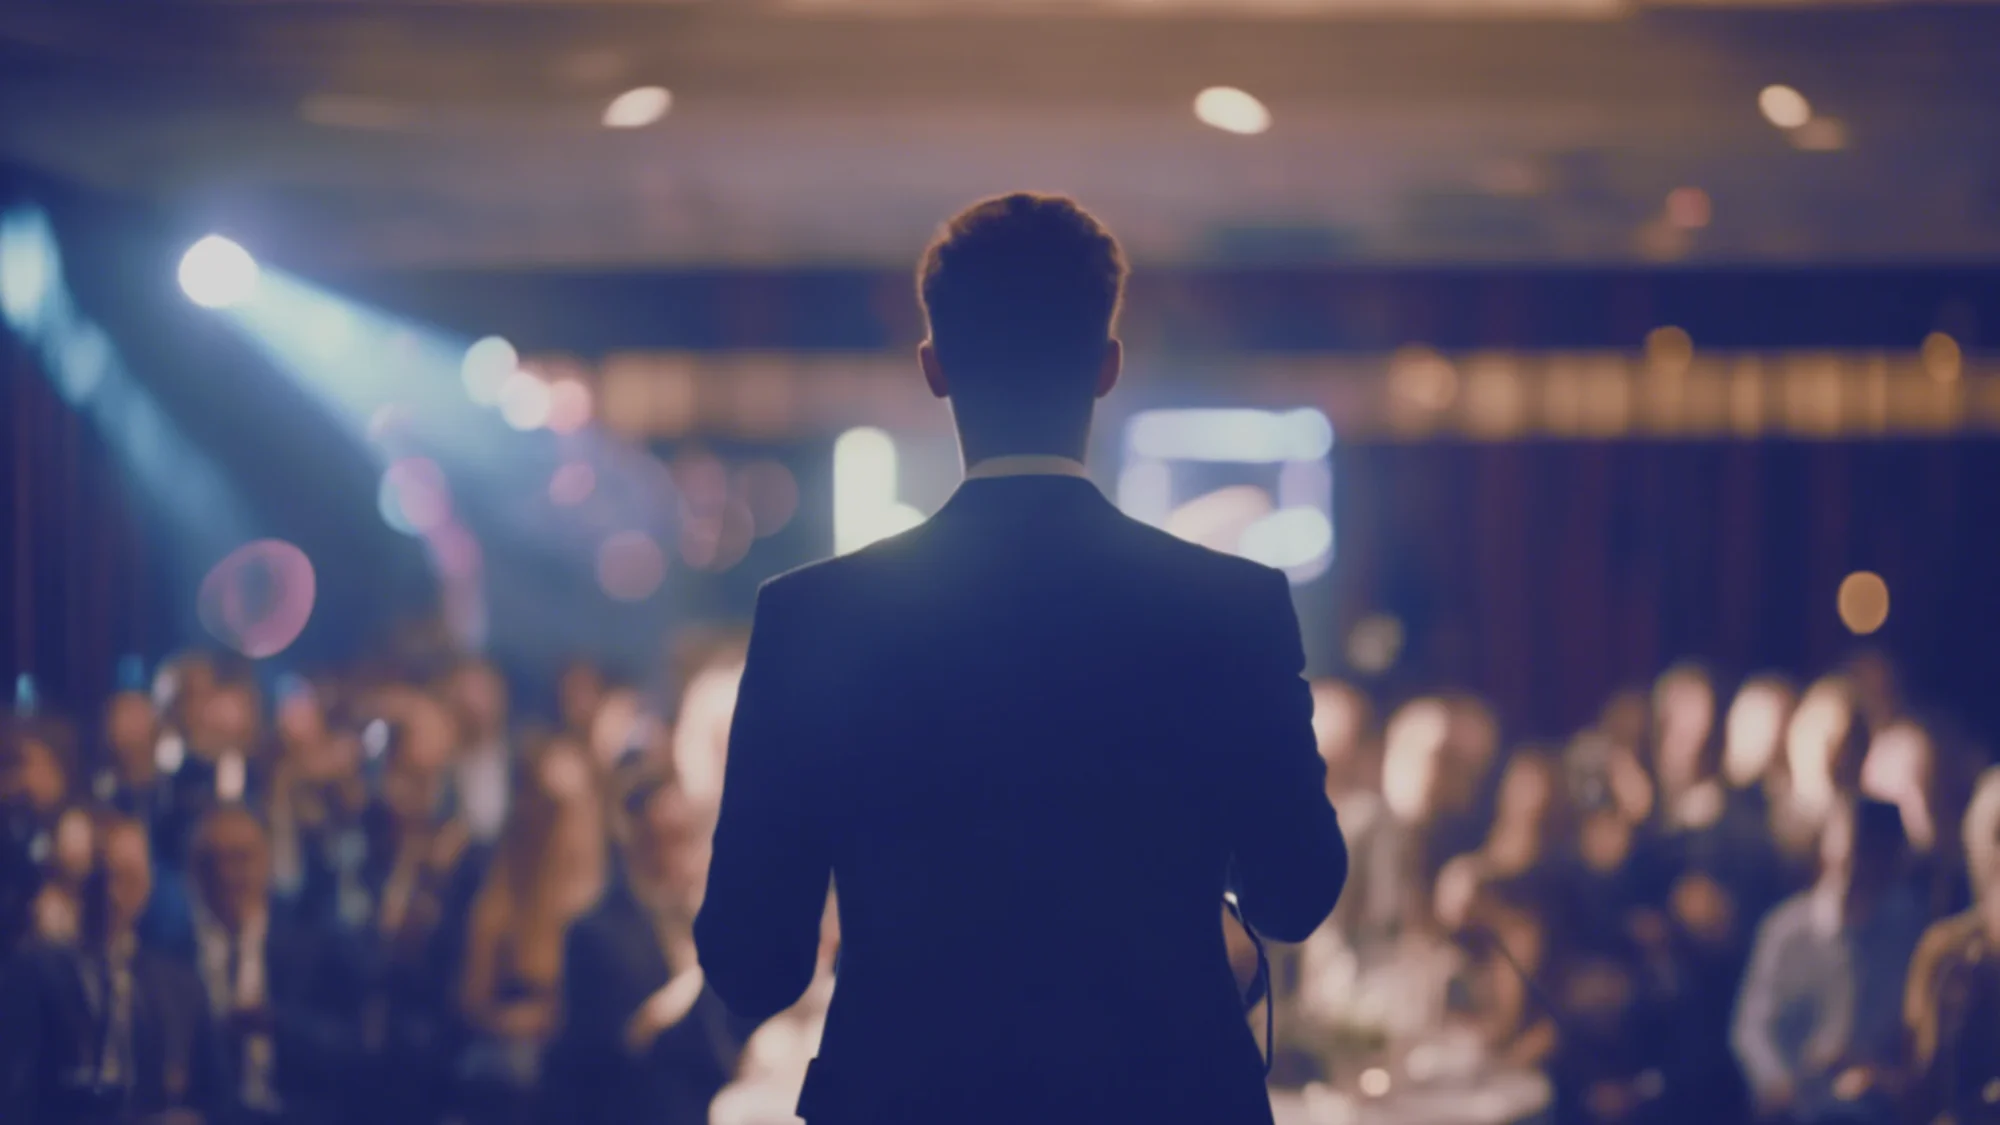 Emcee hosting an event in front of an audience